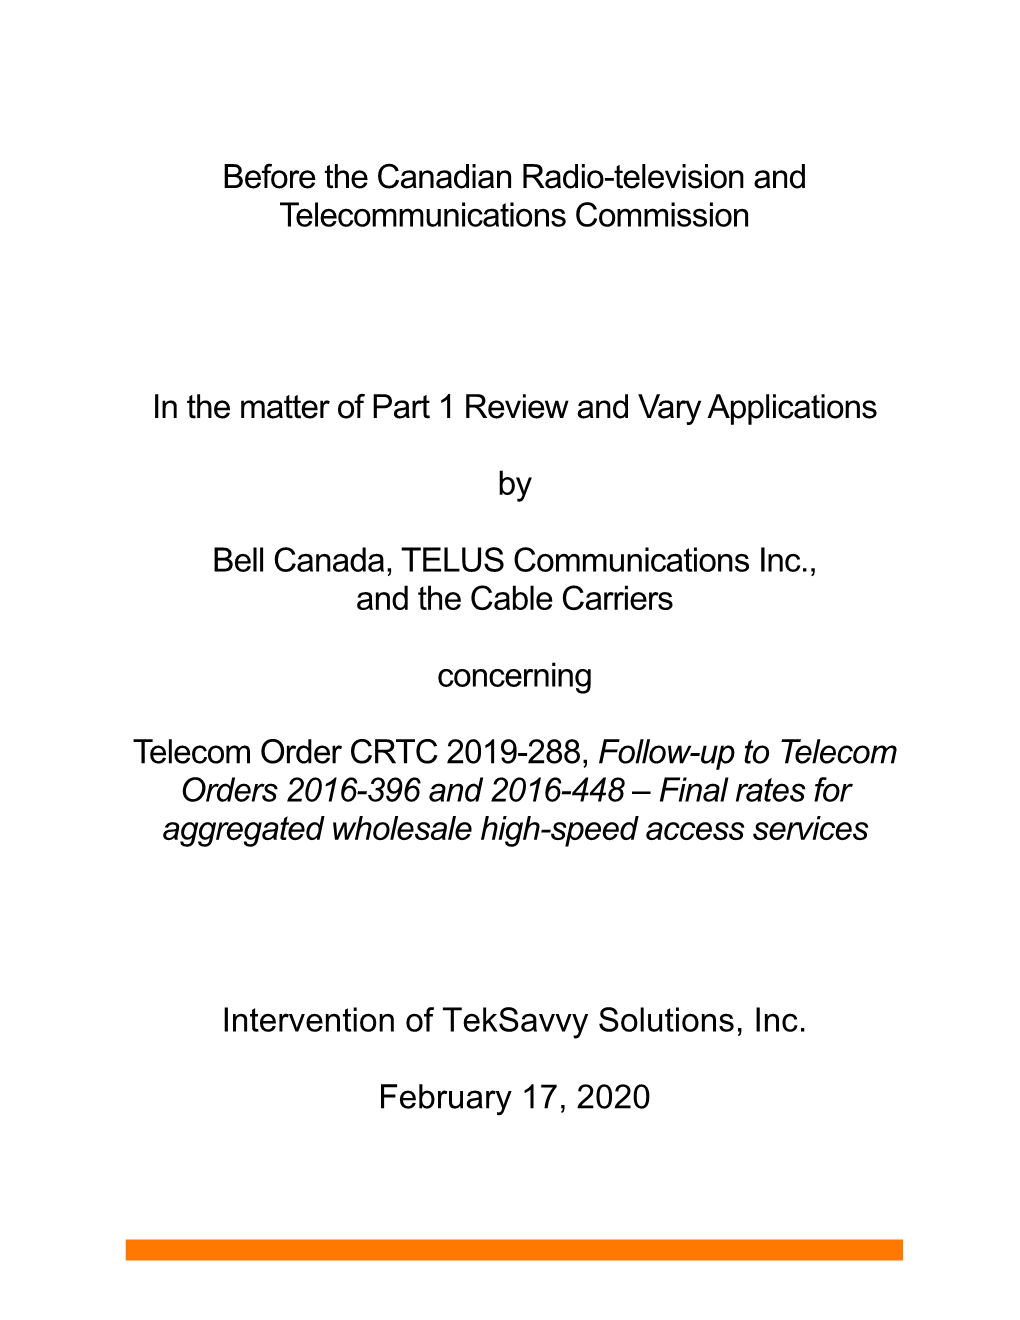 Before the Canadian Radio-Television and Telecommunications Commission in the Matter of Part 1 Review and Vary Applications By